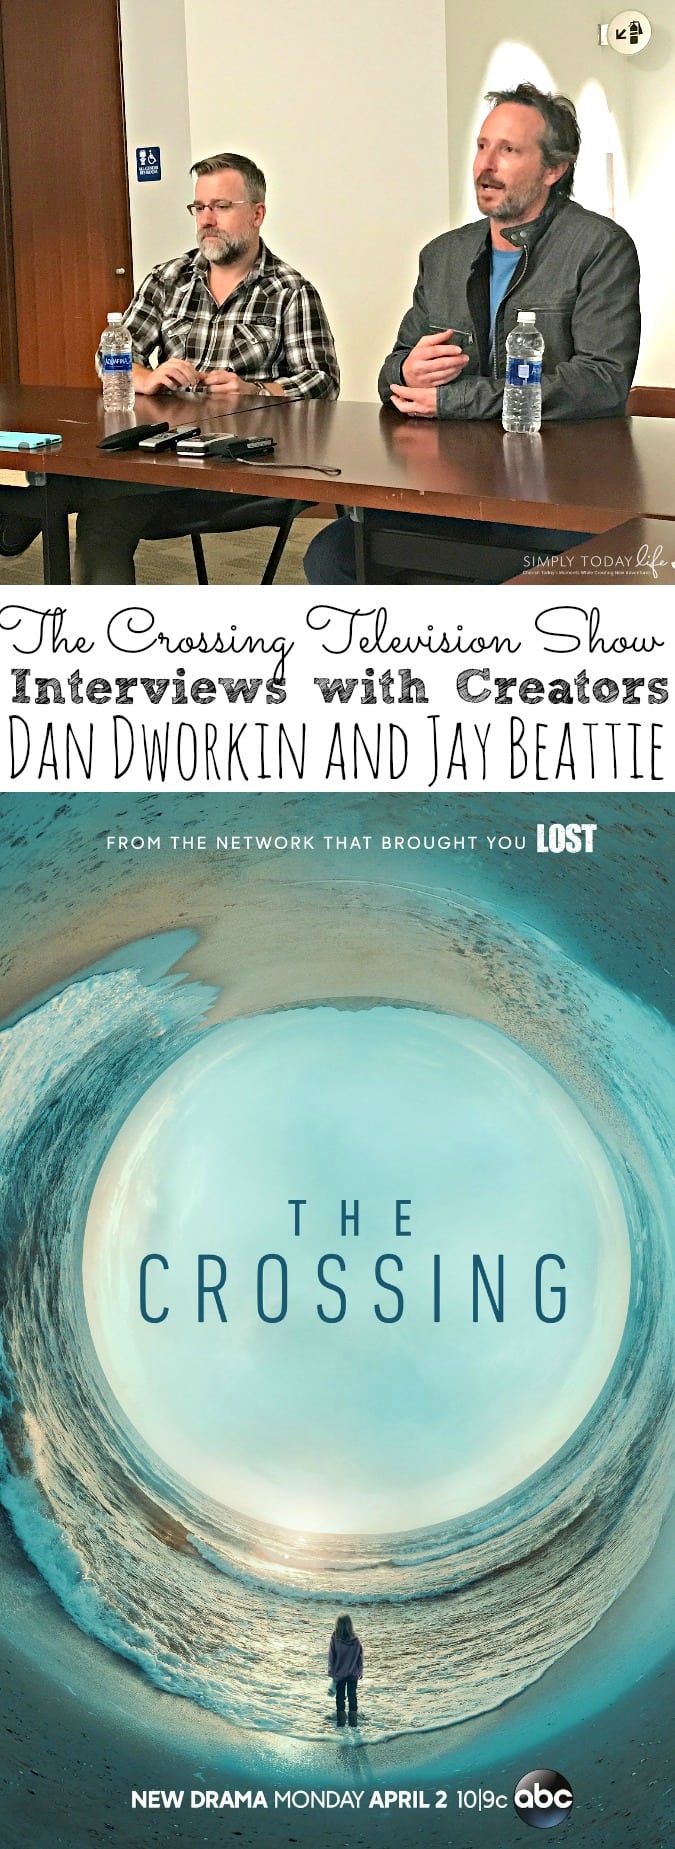 The Crossing Television Show On ABC | Plus Interviews with Creators Dan Dworkin and Jay Beattie - simplytodaylife.com